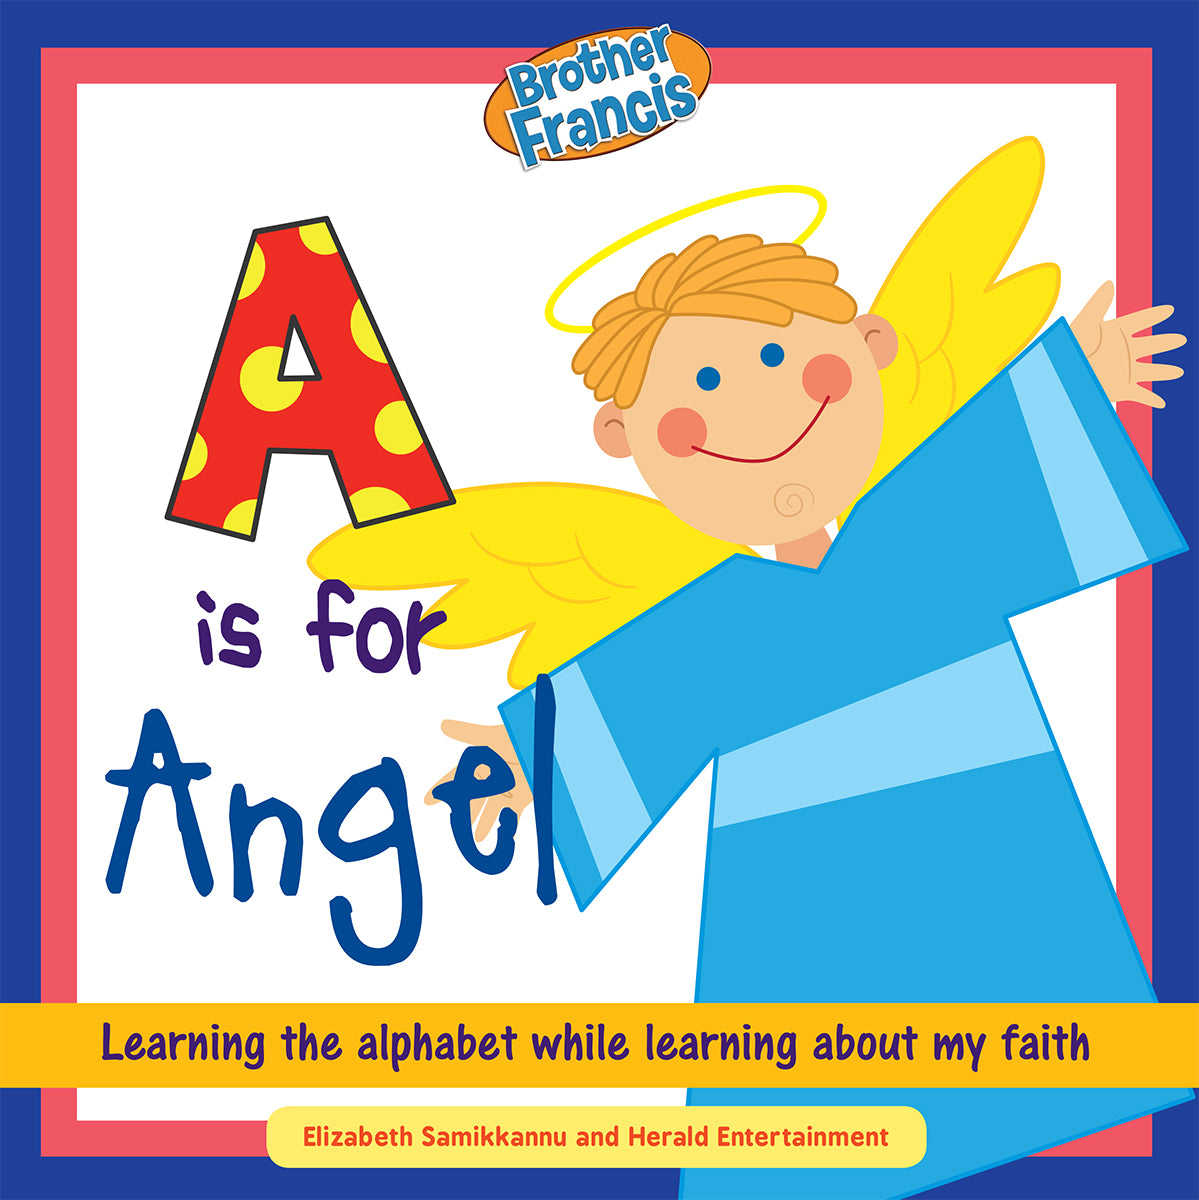 A is for Angel